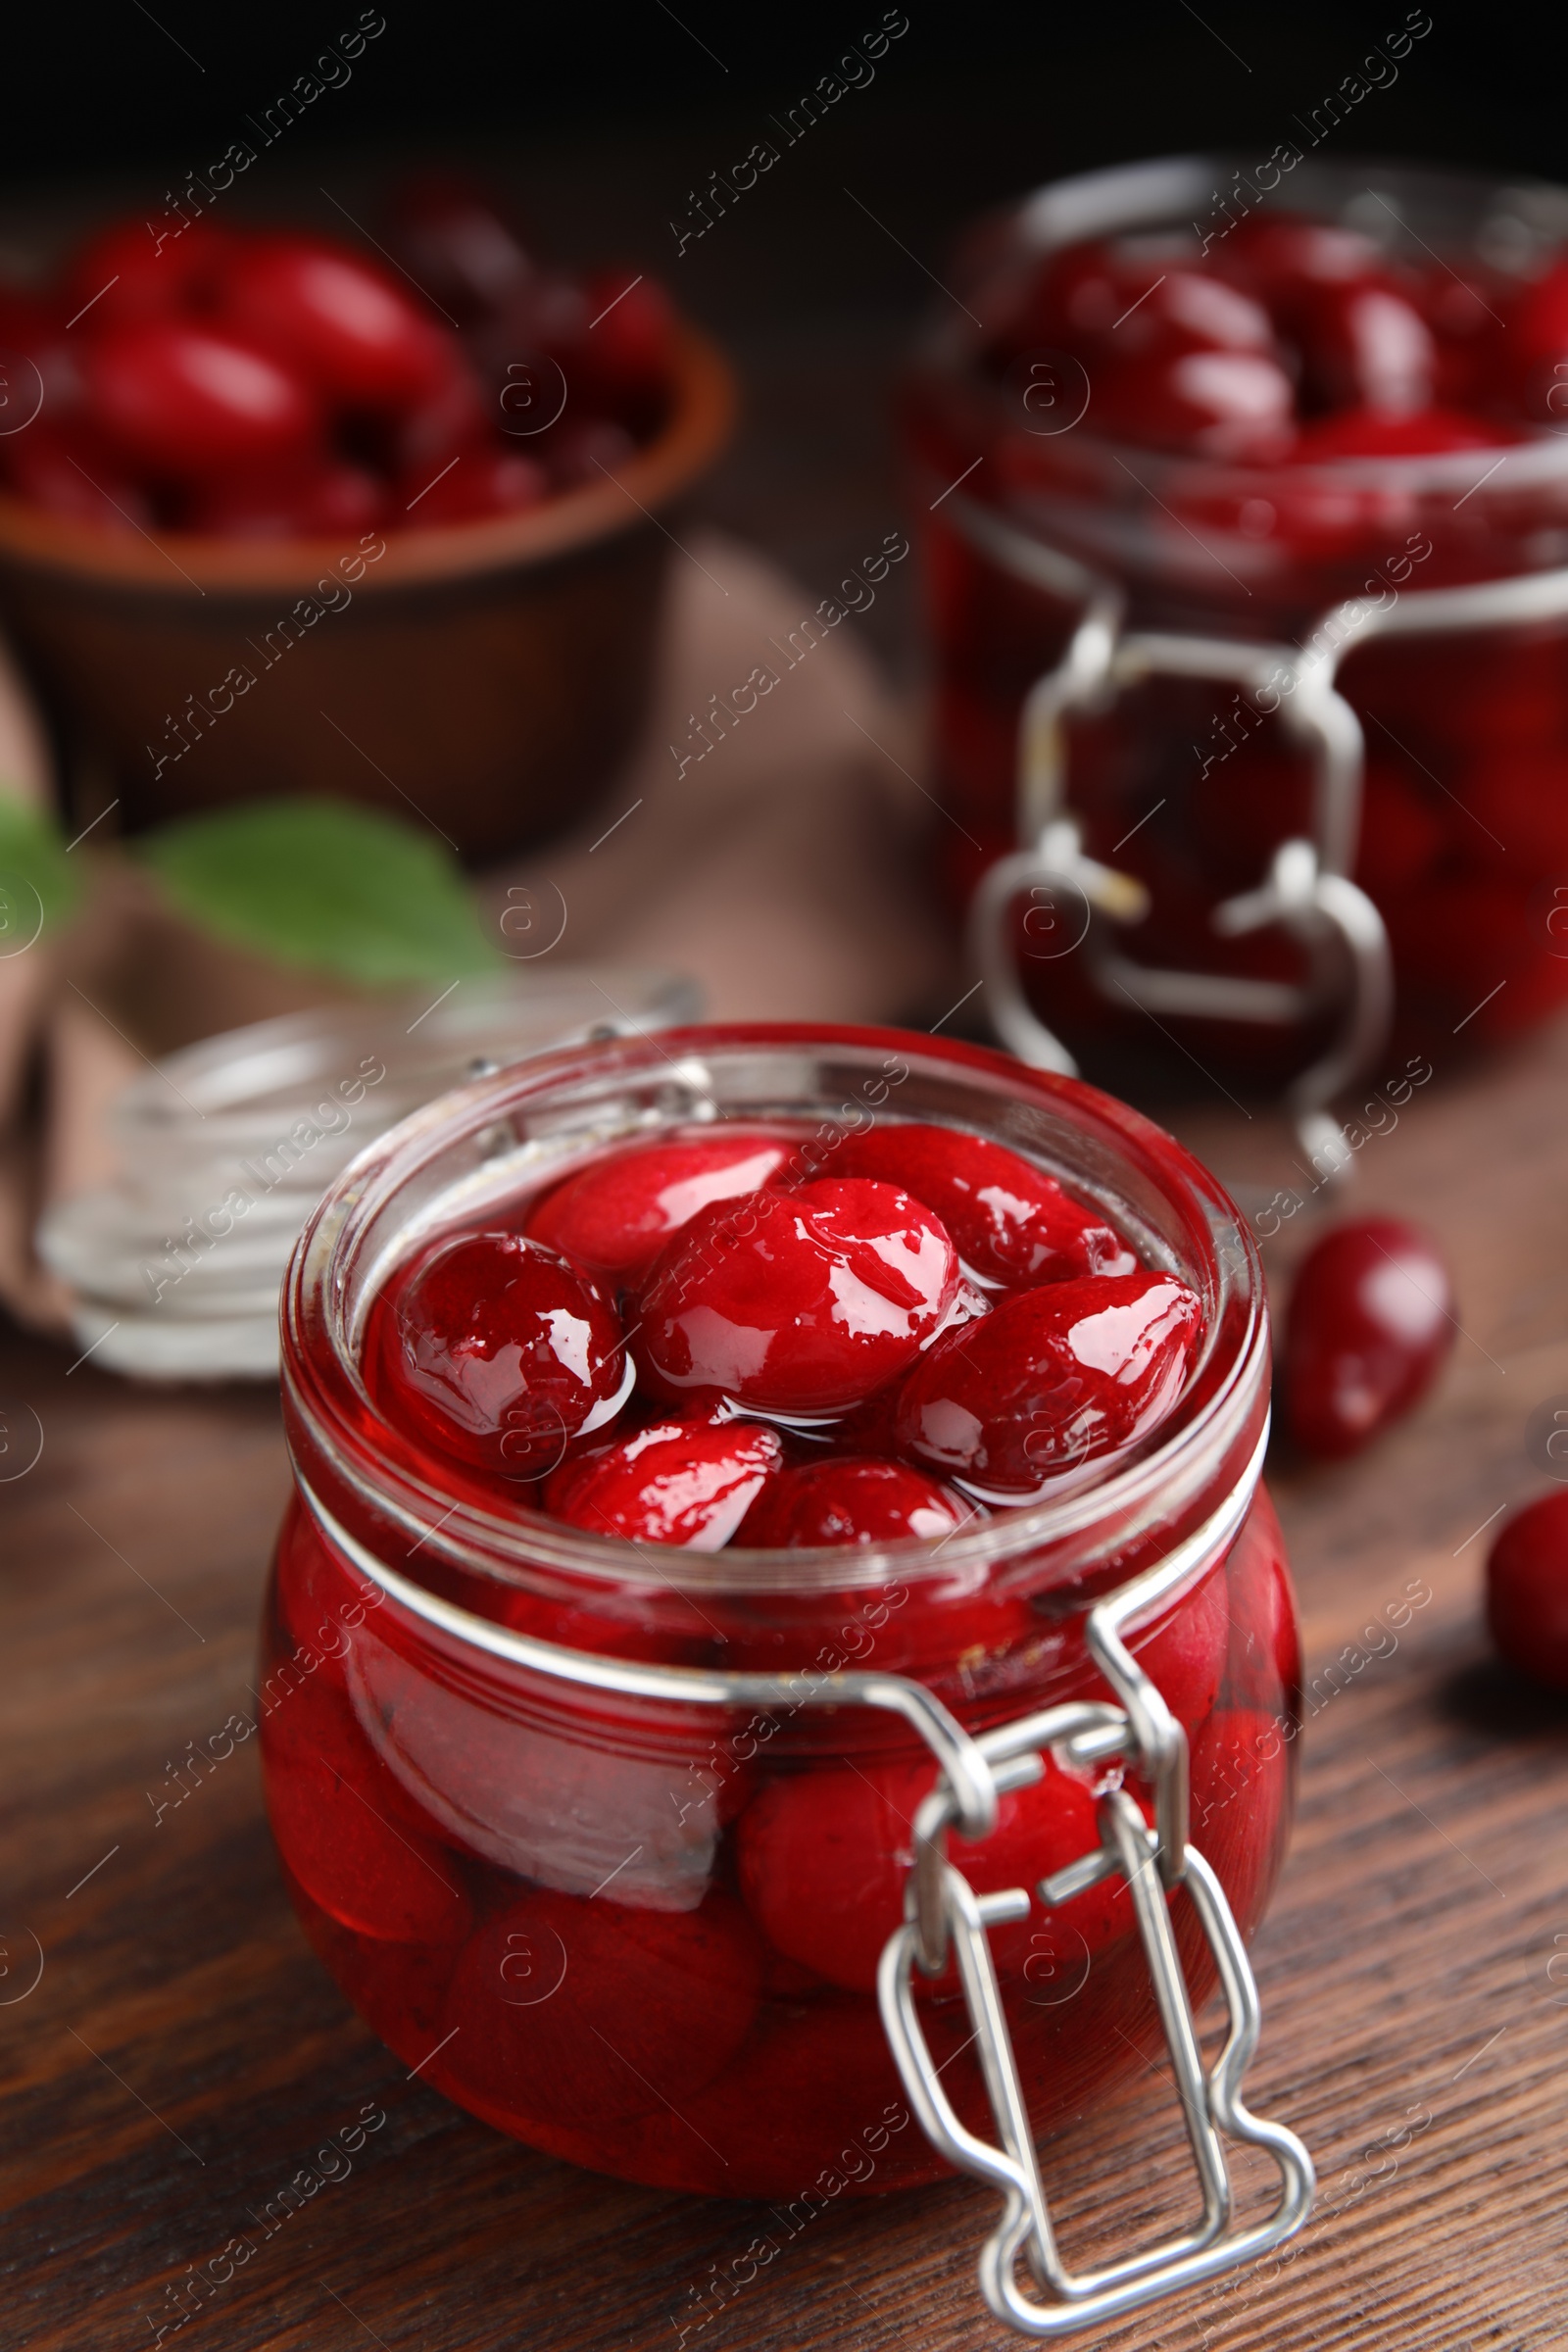 Photo of Delicious dogwood jam with berries in glass jar on wooden table